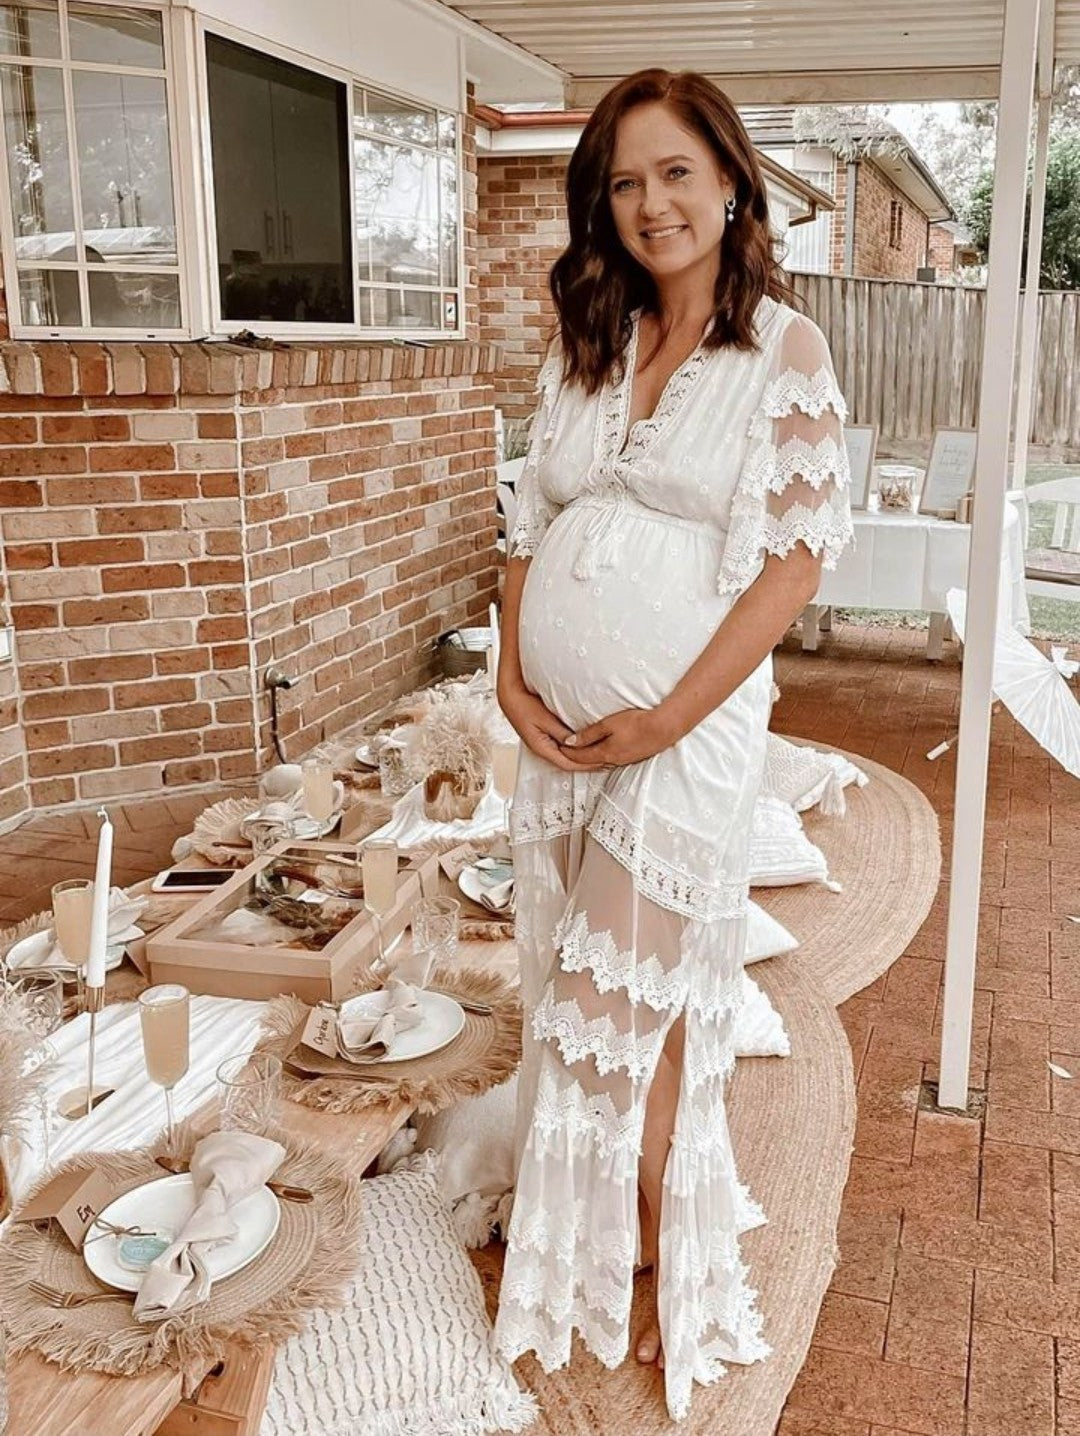 Pregnant mum wears a white lace maternity dress during her boho inspired baby shower